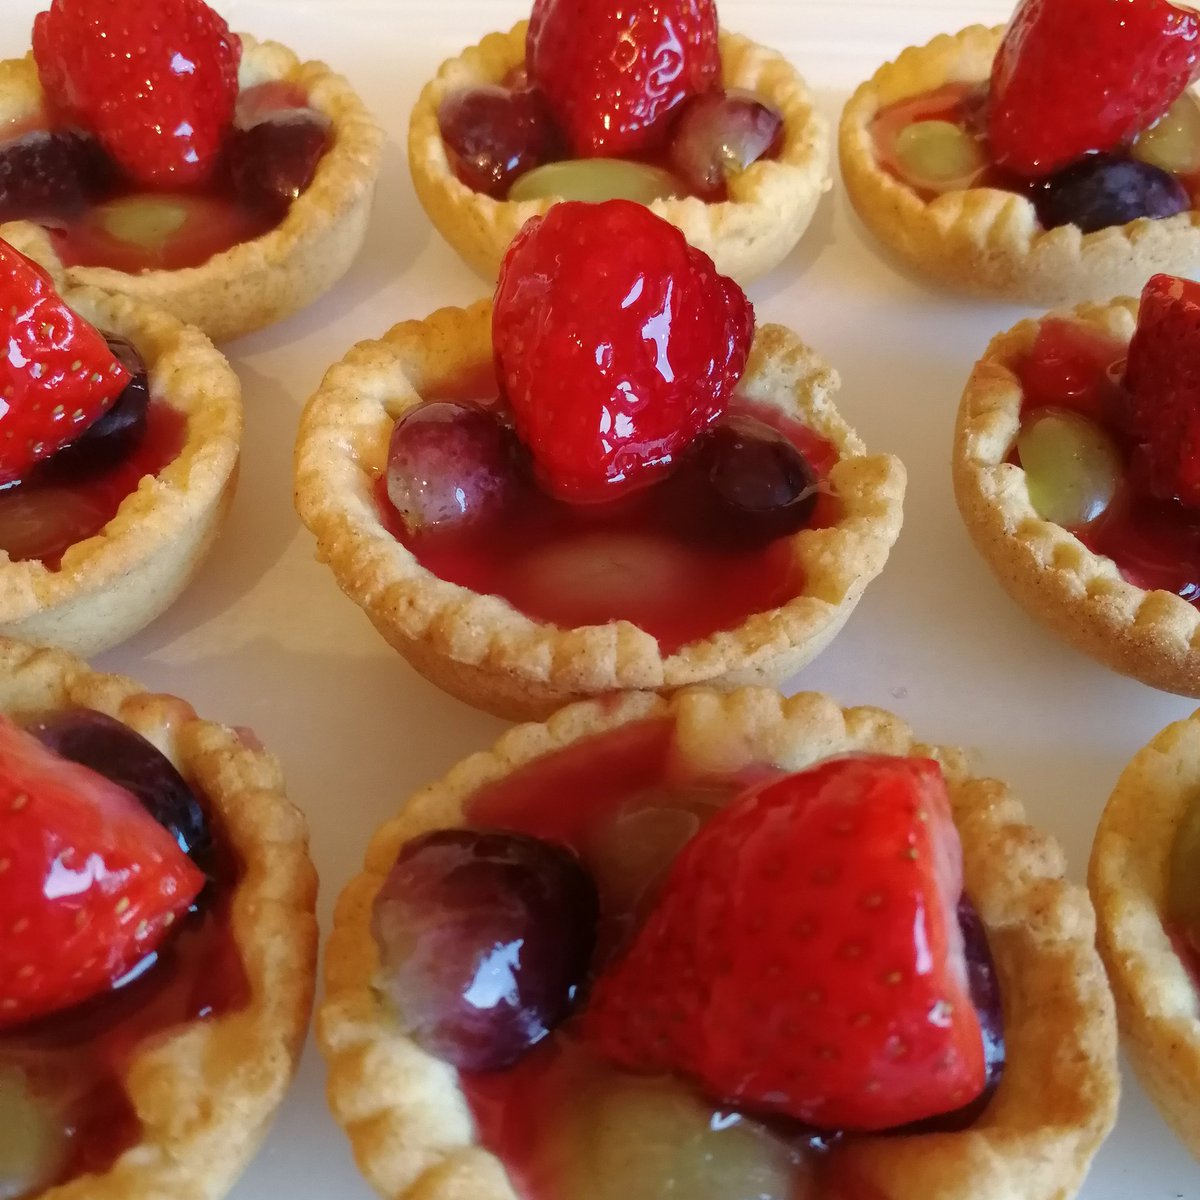 Fresh fruit tartlets ready for an afternoon tea party.
#joejoesbakes #afternoontea #afternoonteaparty #freshlybaked #bakeoftheday #homebaker #homebaked #womaninbiz #localbusiness #localbaker #leicesterbusiness #leicesterbaker #leicestershiremakes #leicestershire #leicester